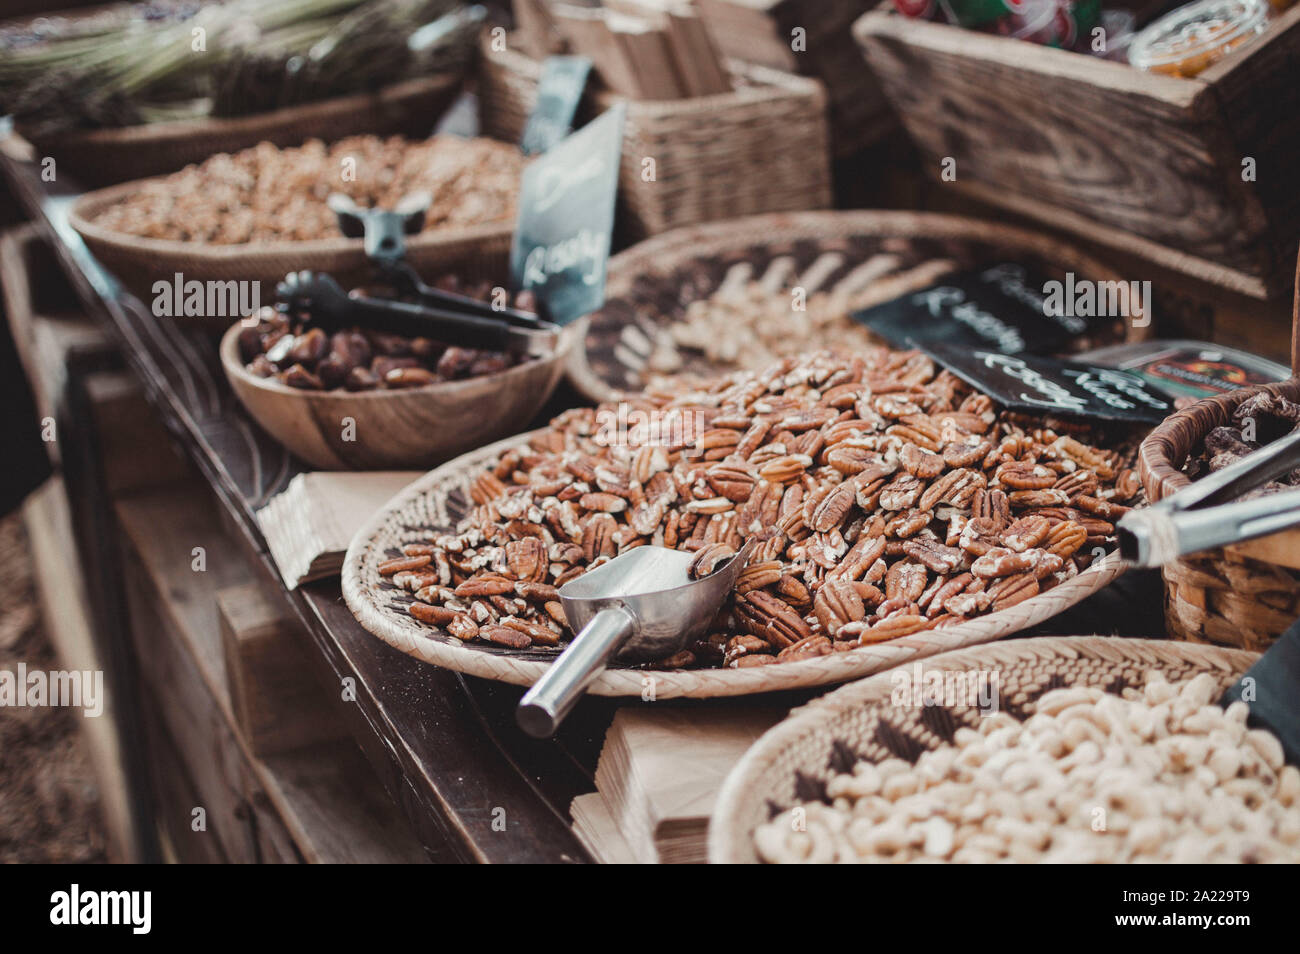 A basket of all types of nuts Stock Photo